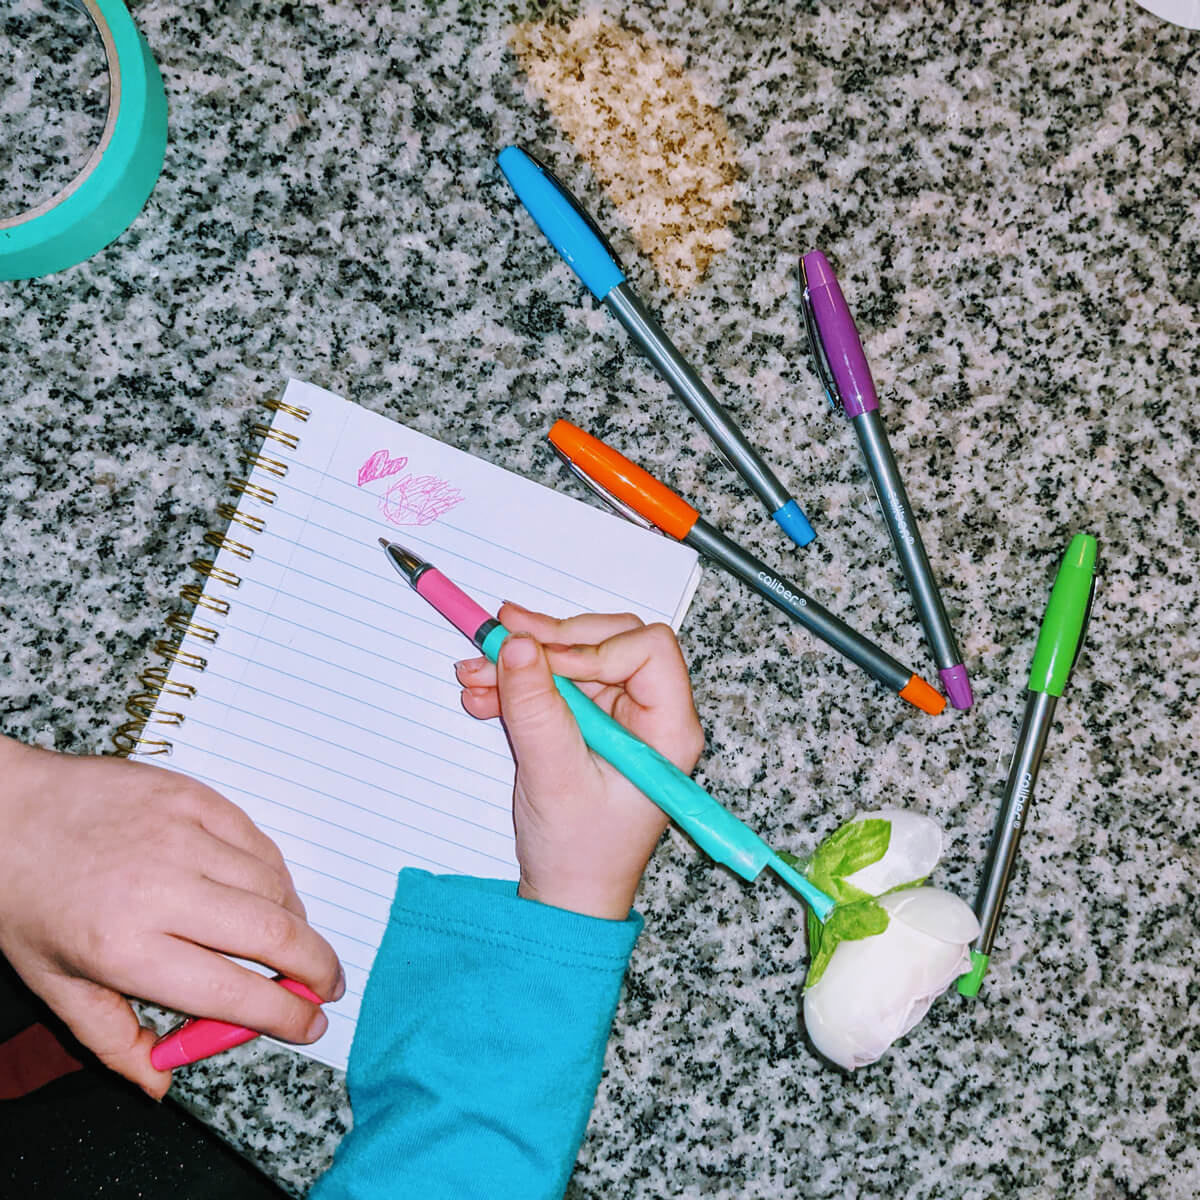 Little Girl Writing with a Flower Pen and other colored pens in a notebook